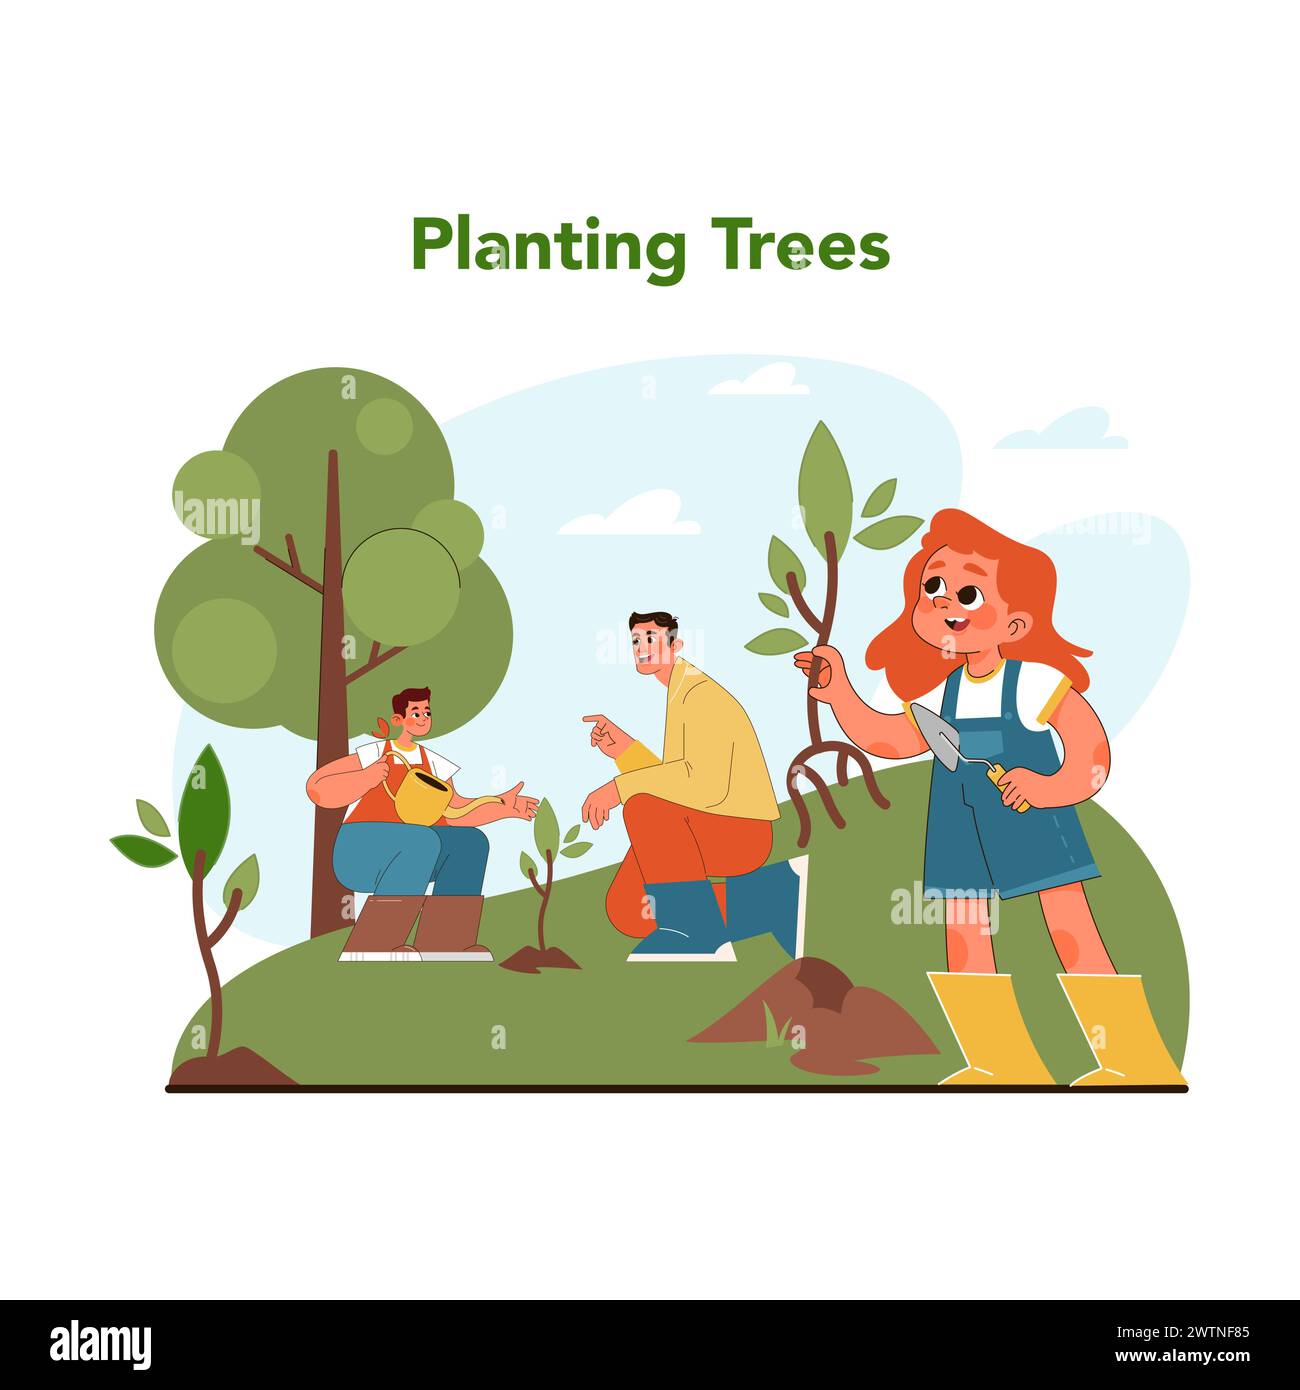 Tree planting concept. Spirited children and attentive adult participate in wholesome act of planting young trees, fostering growth and environmental stewardship. Flat vector illustration Stock Vector